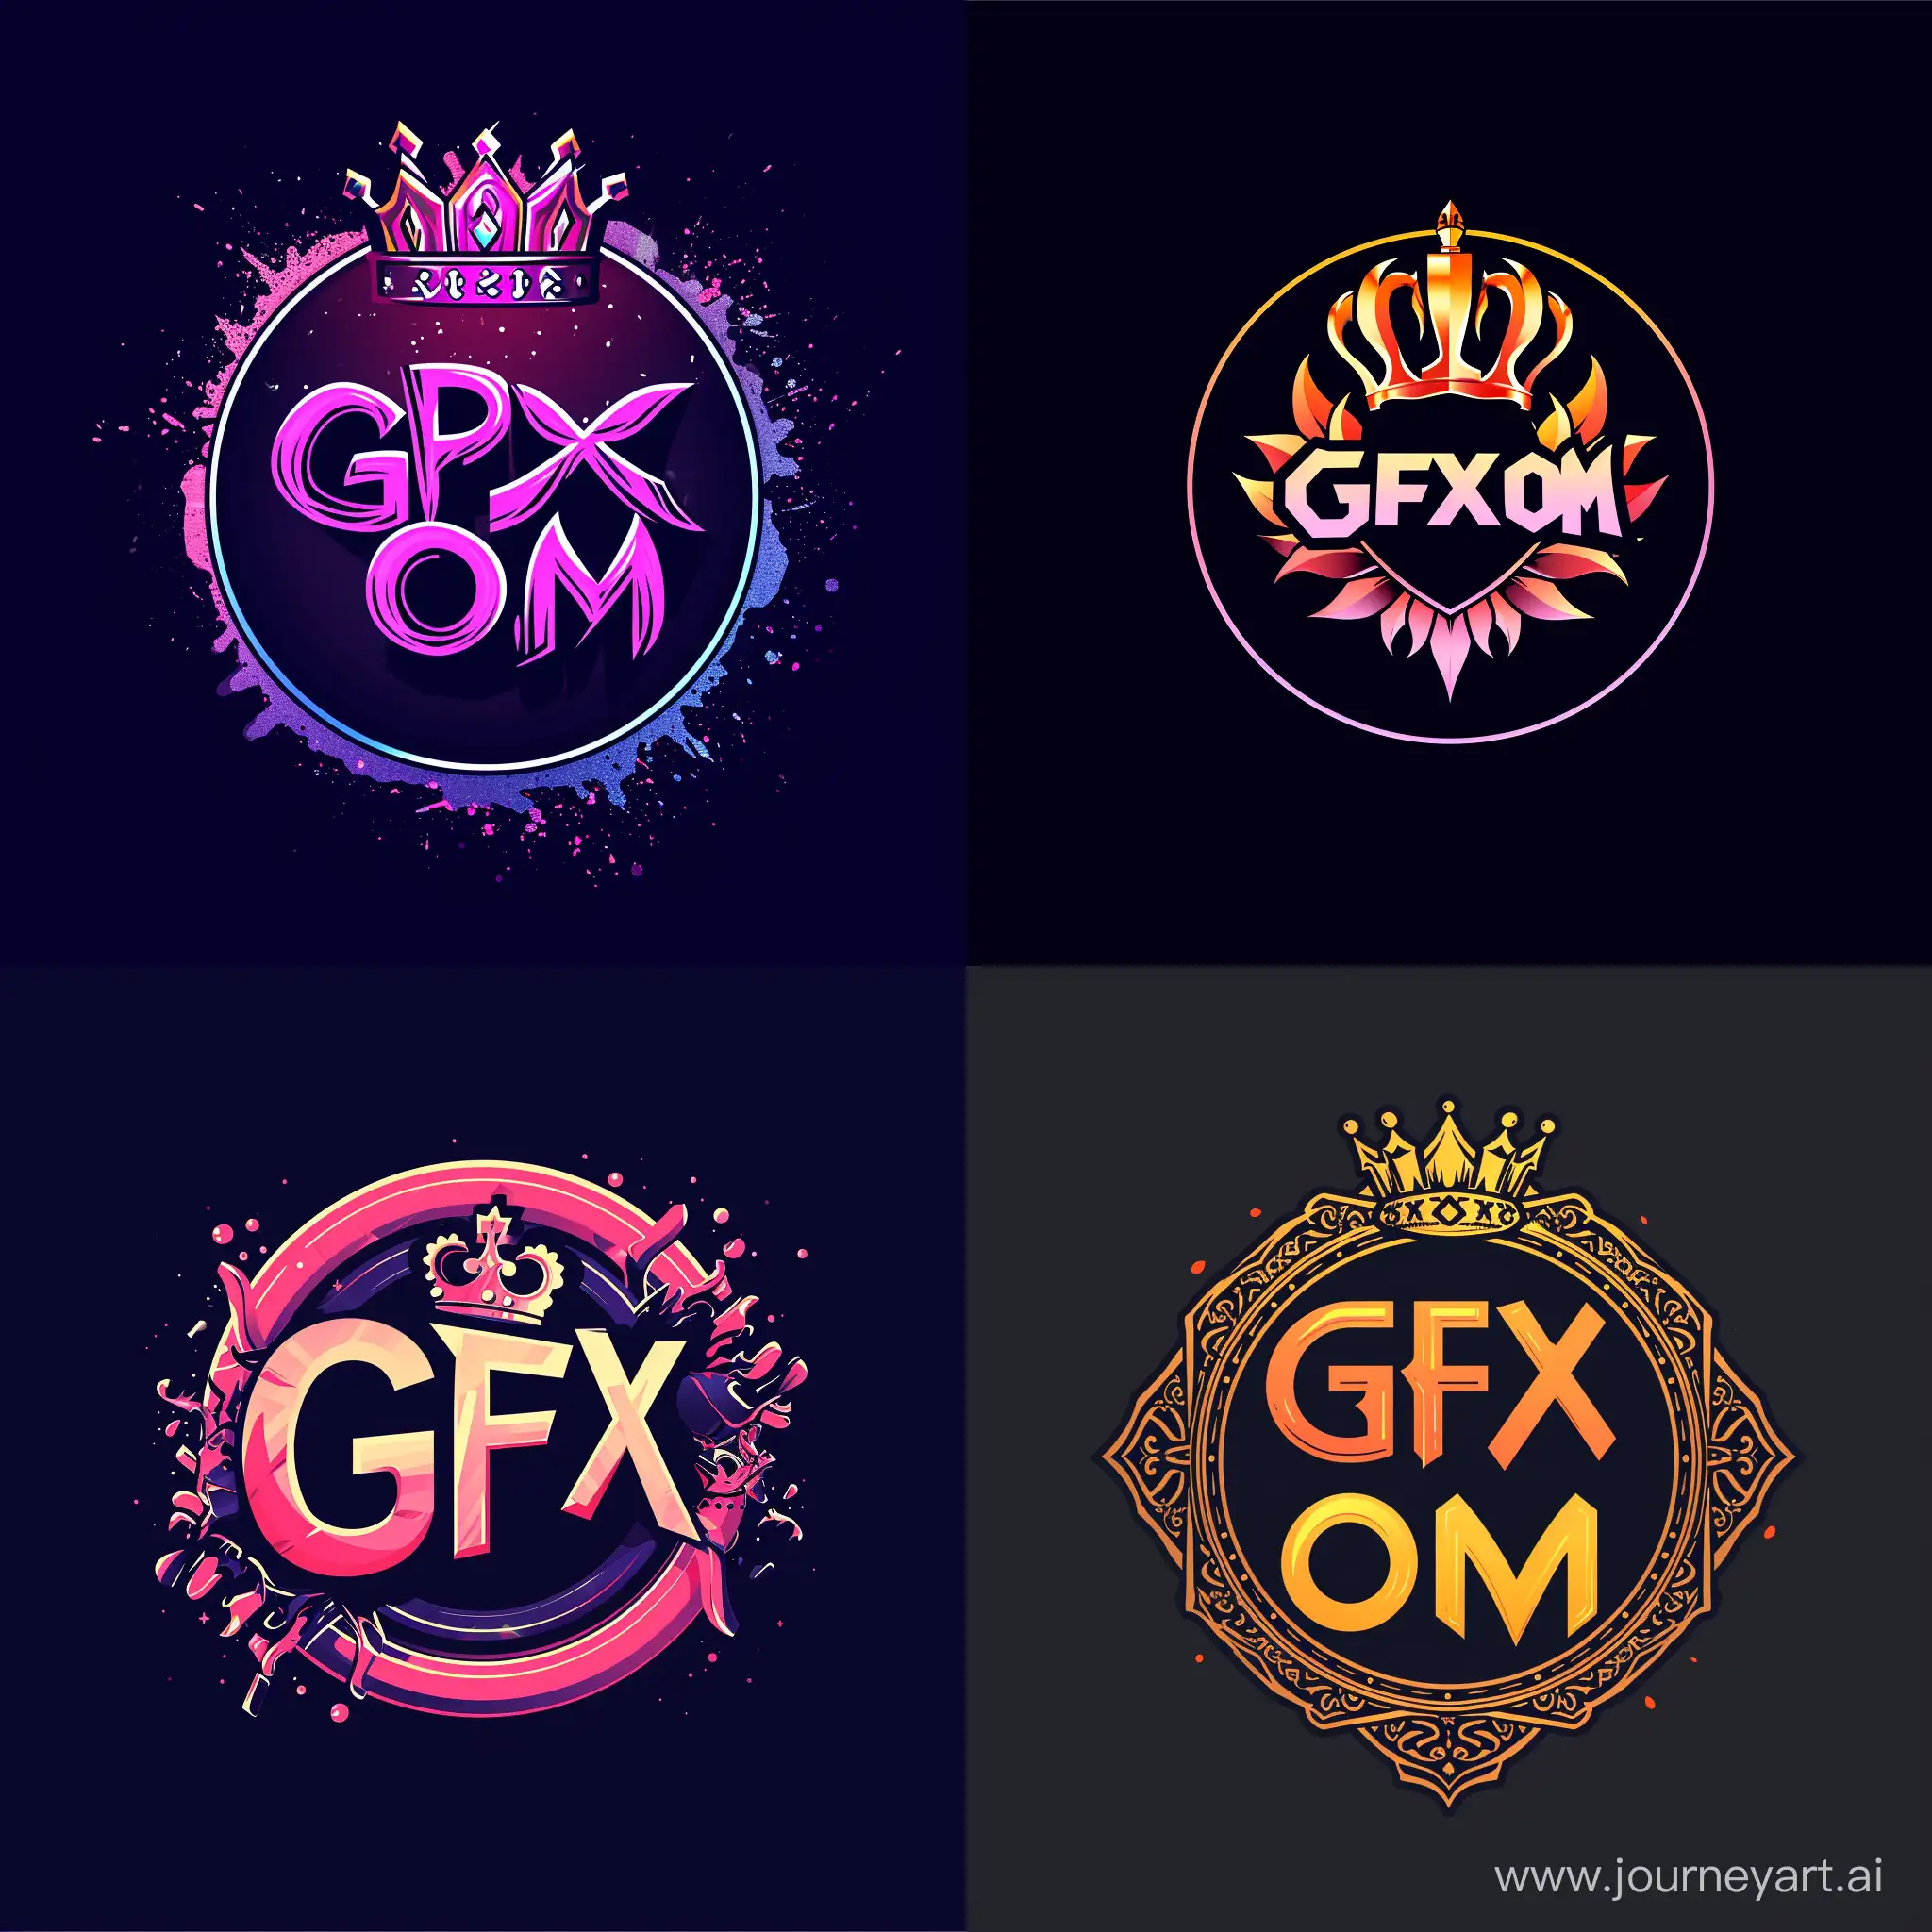 Professional-GFX-OM-Artist-Company-Logo-with-Crown